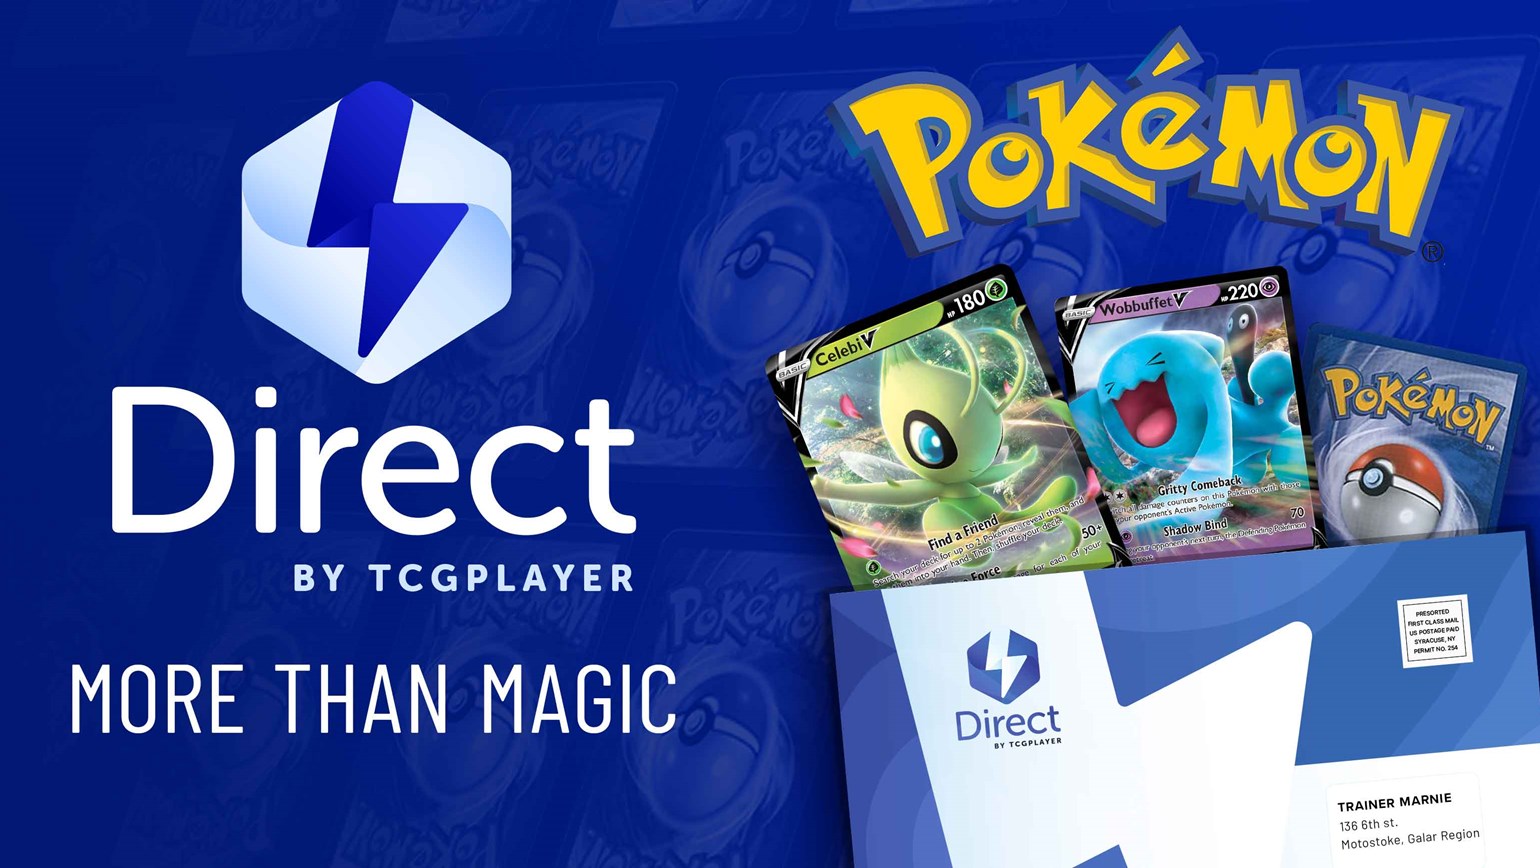 Direct by TCGplayer - More than Magic!